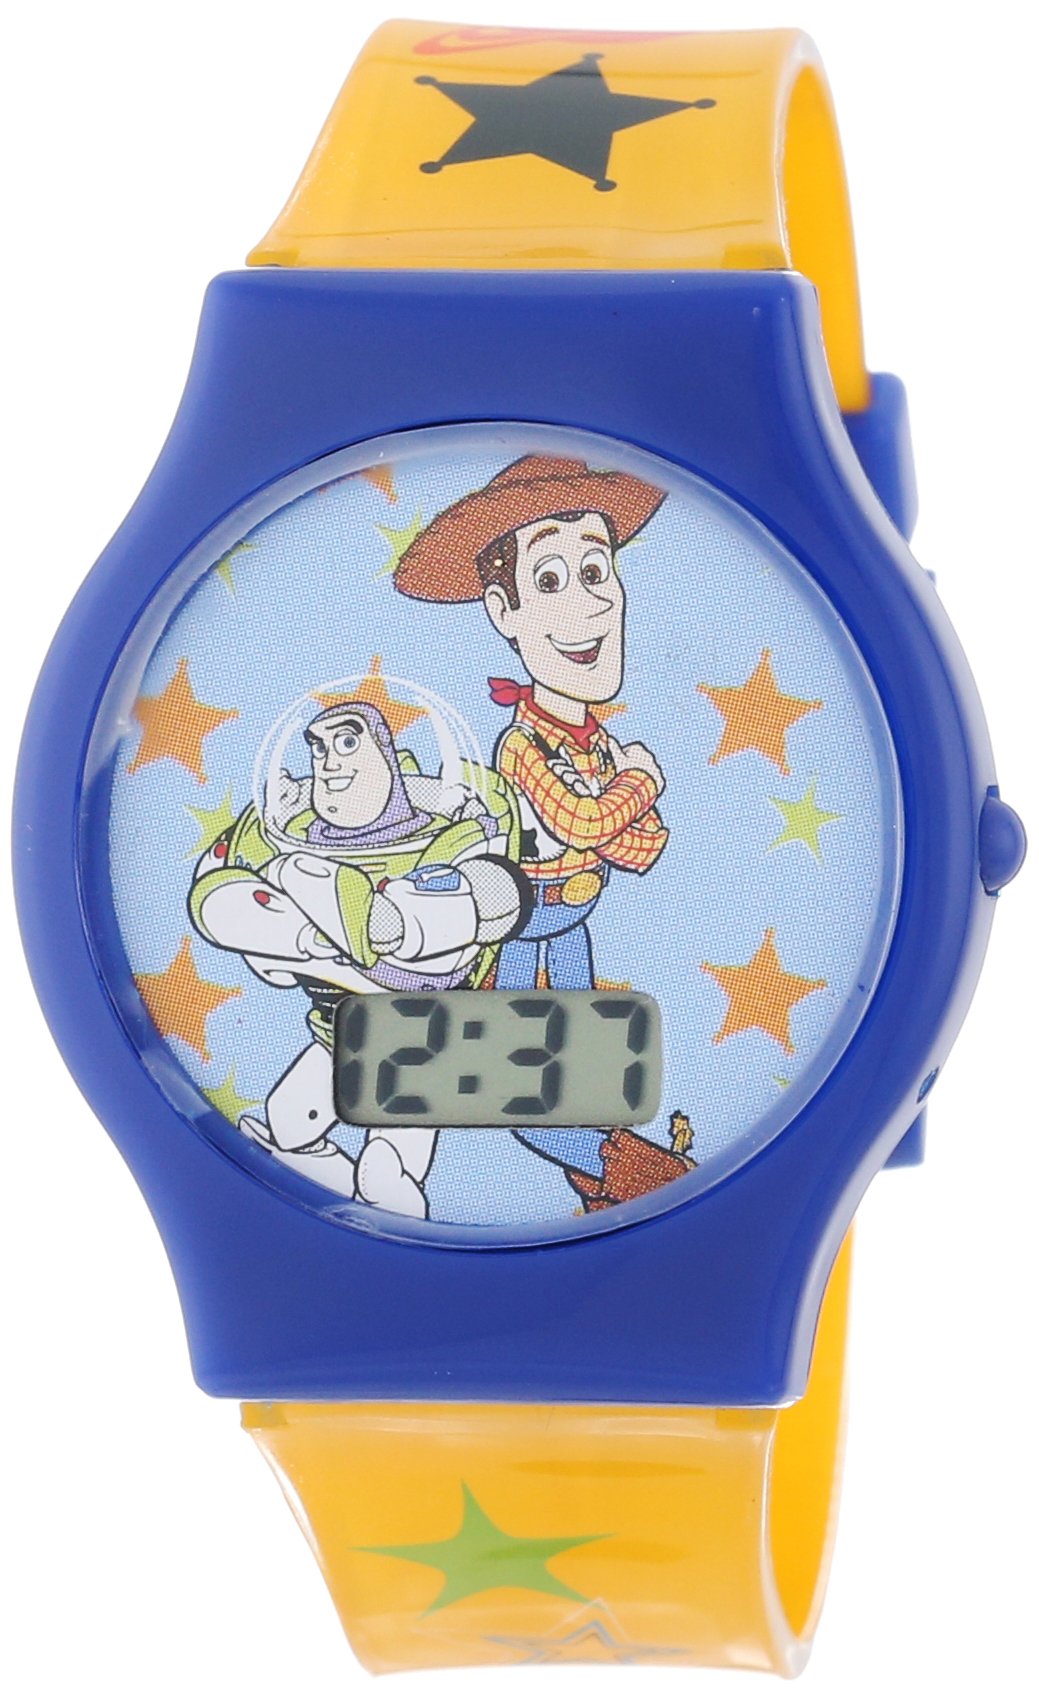 Disney Kids' TY1095 Toy Story Watch with Yellow Plastic Band